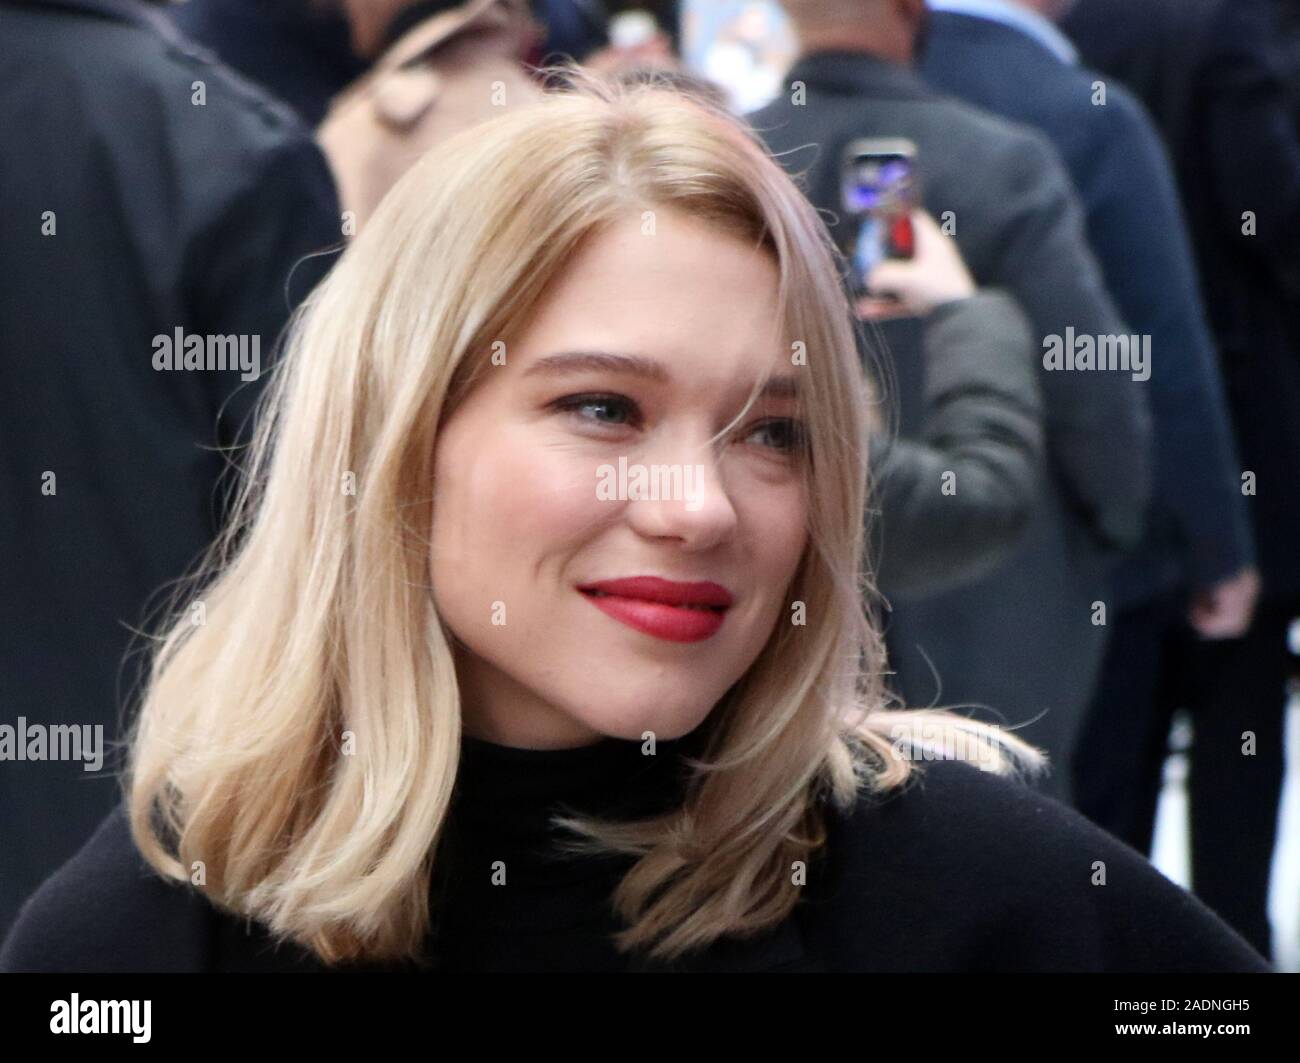 LEA SEYDOUX Out Promotes New Bond Movie No Time To Die in London 09/23/2021  – HawtCelebs